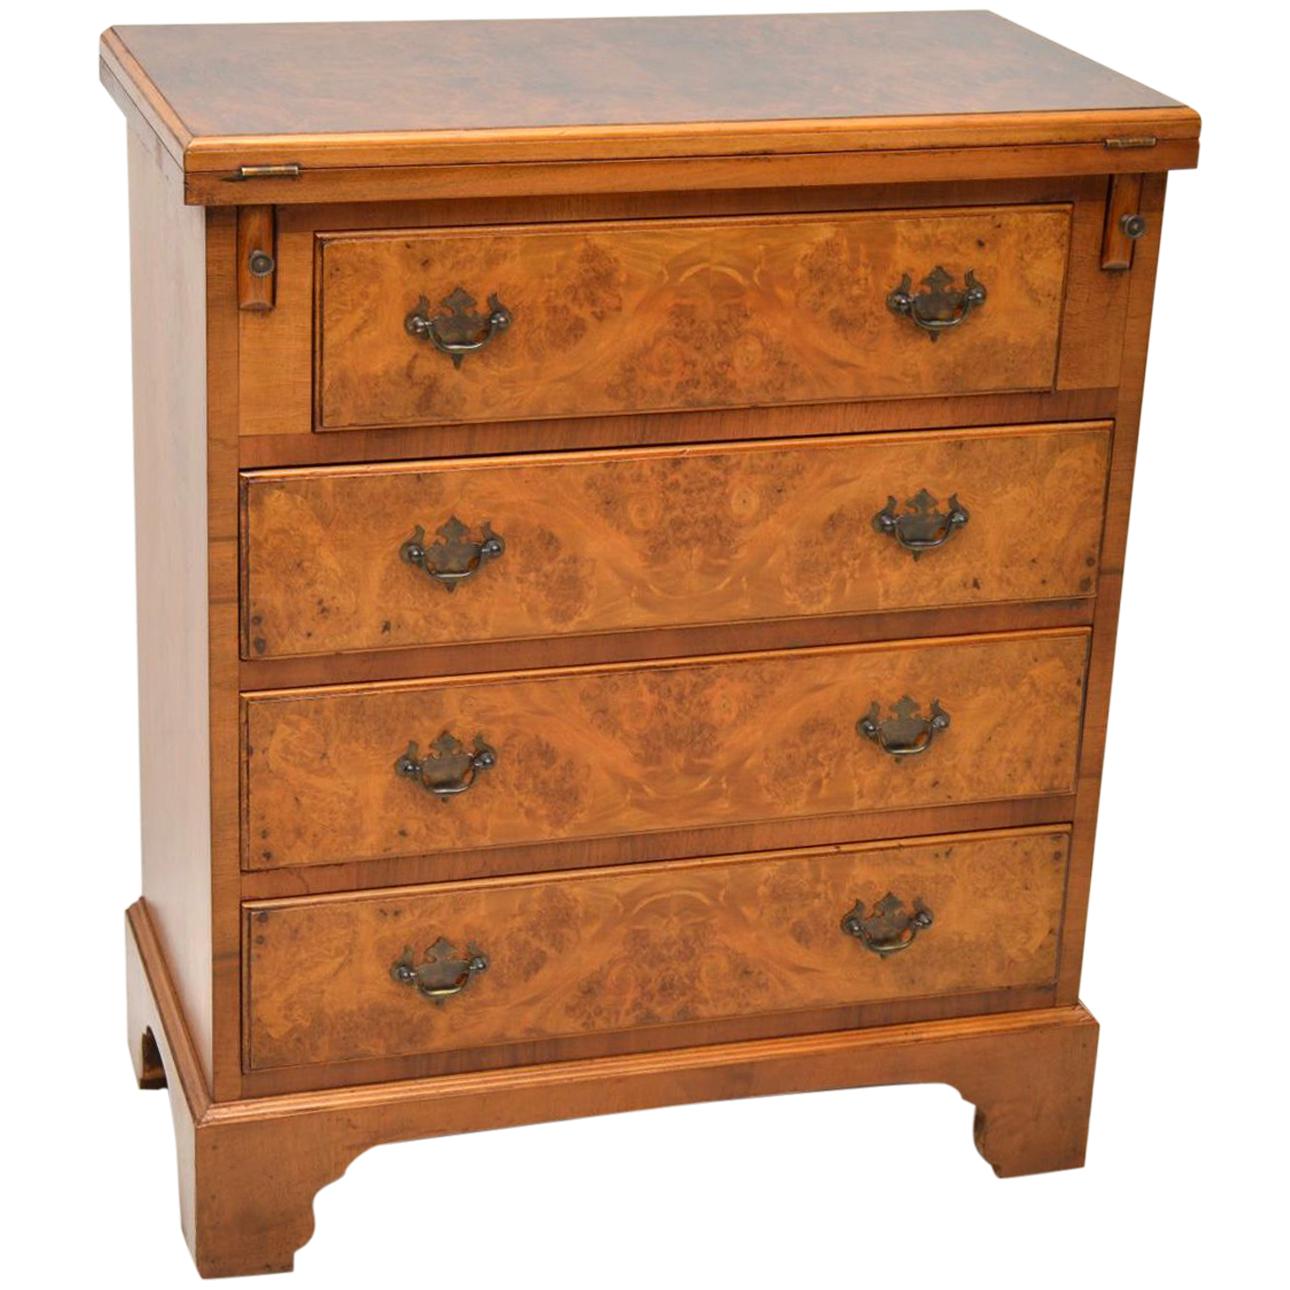 Antique Burr Walnut Bachelors Chest of Drawers